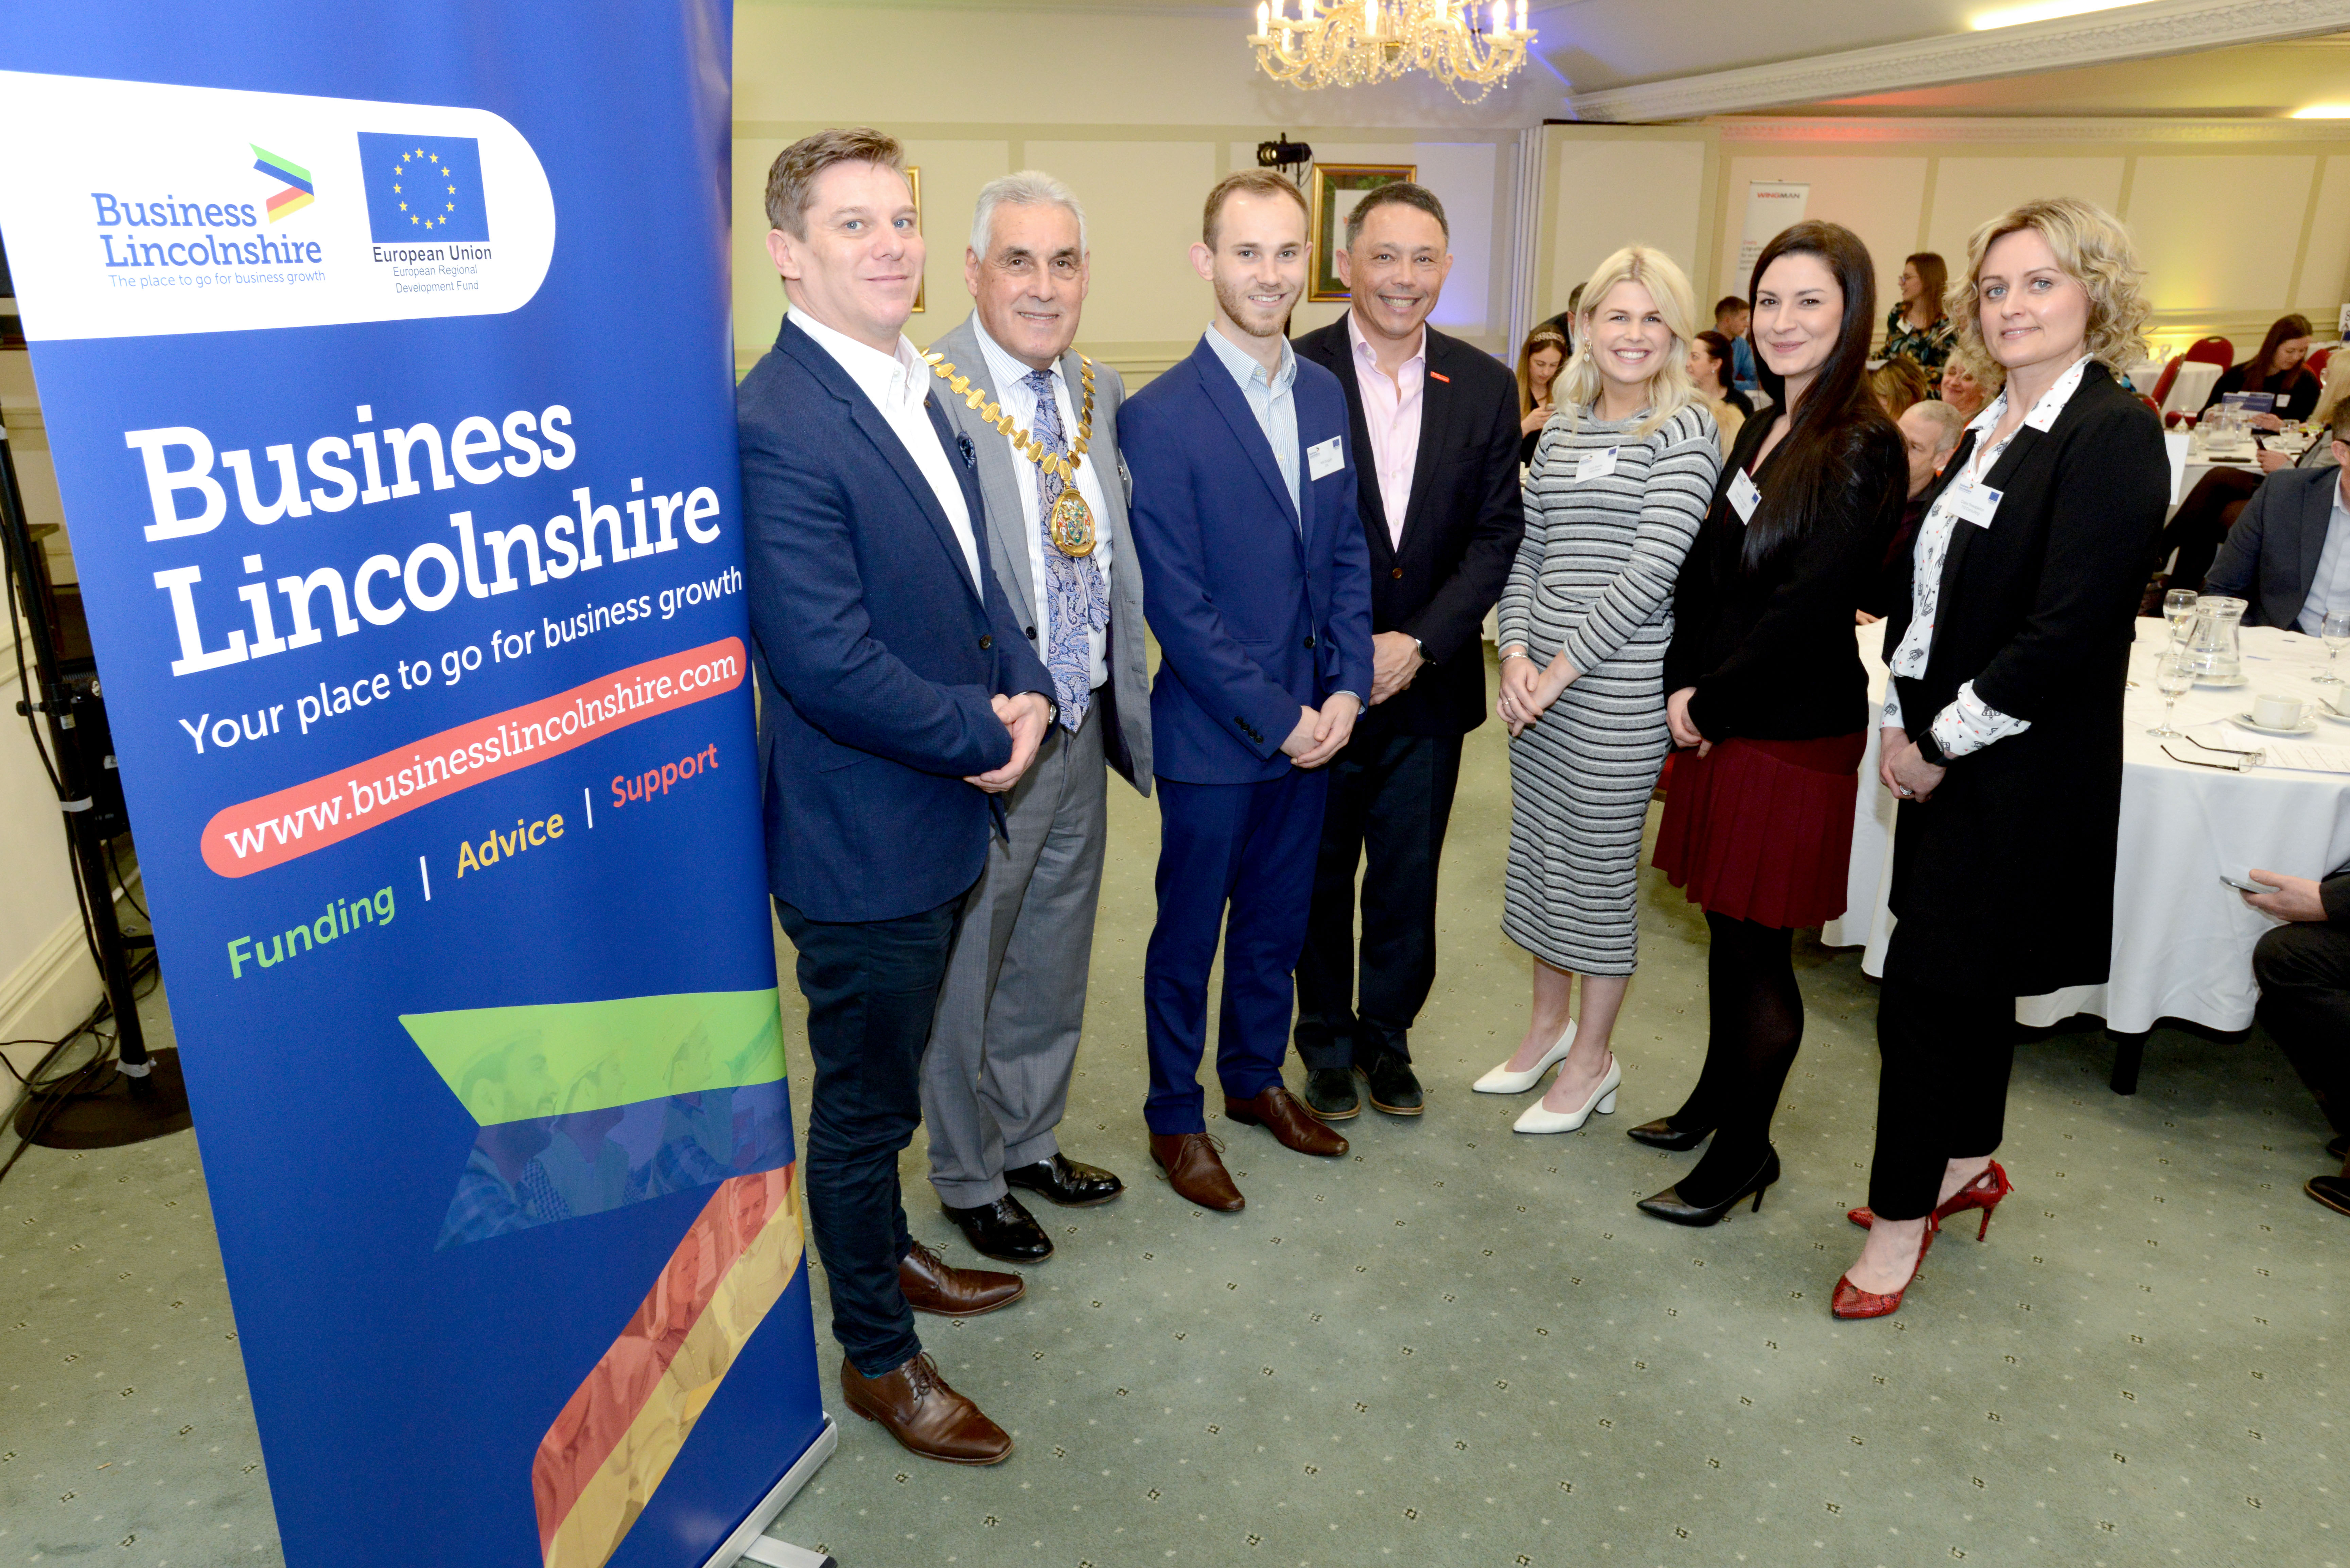 4 gentleman and 3 women stood next to Business Lincolnshire banner at an event